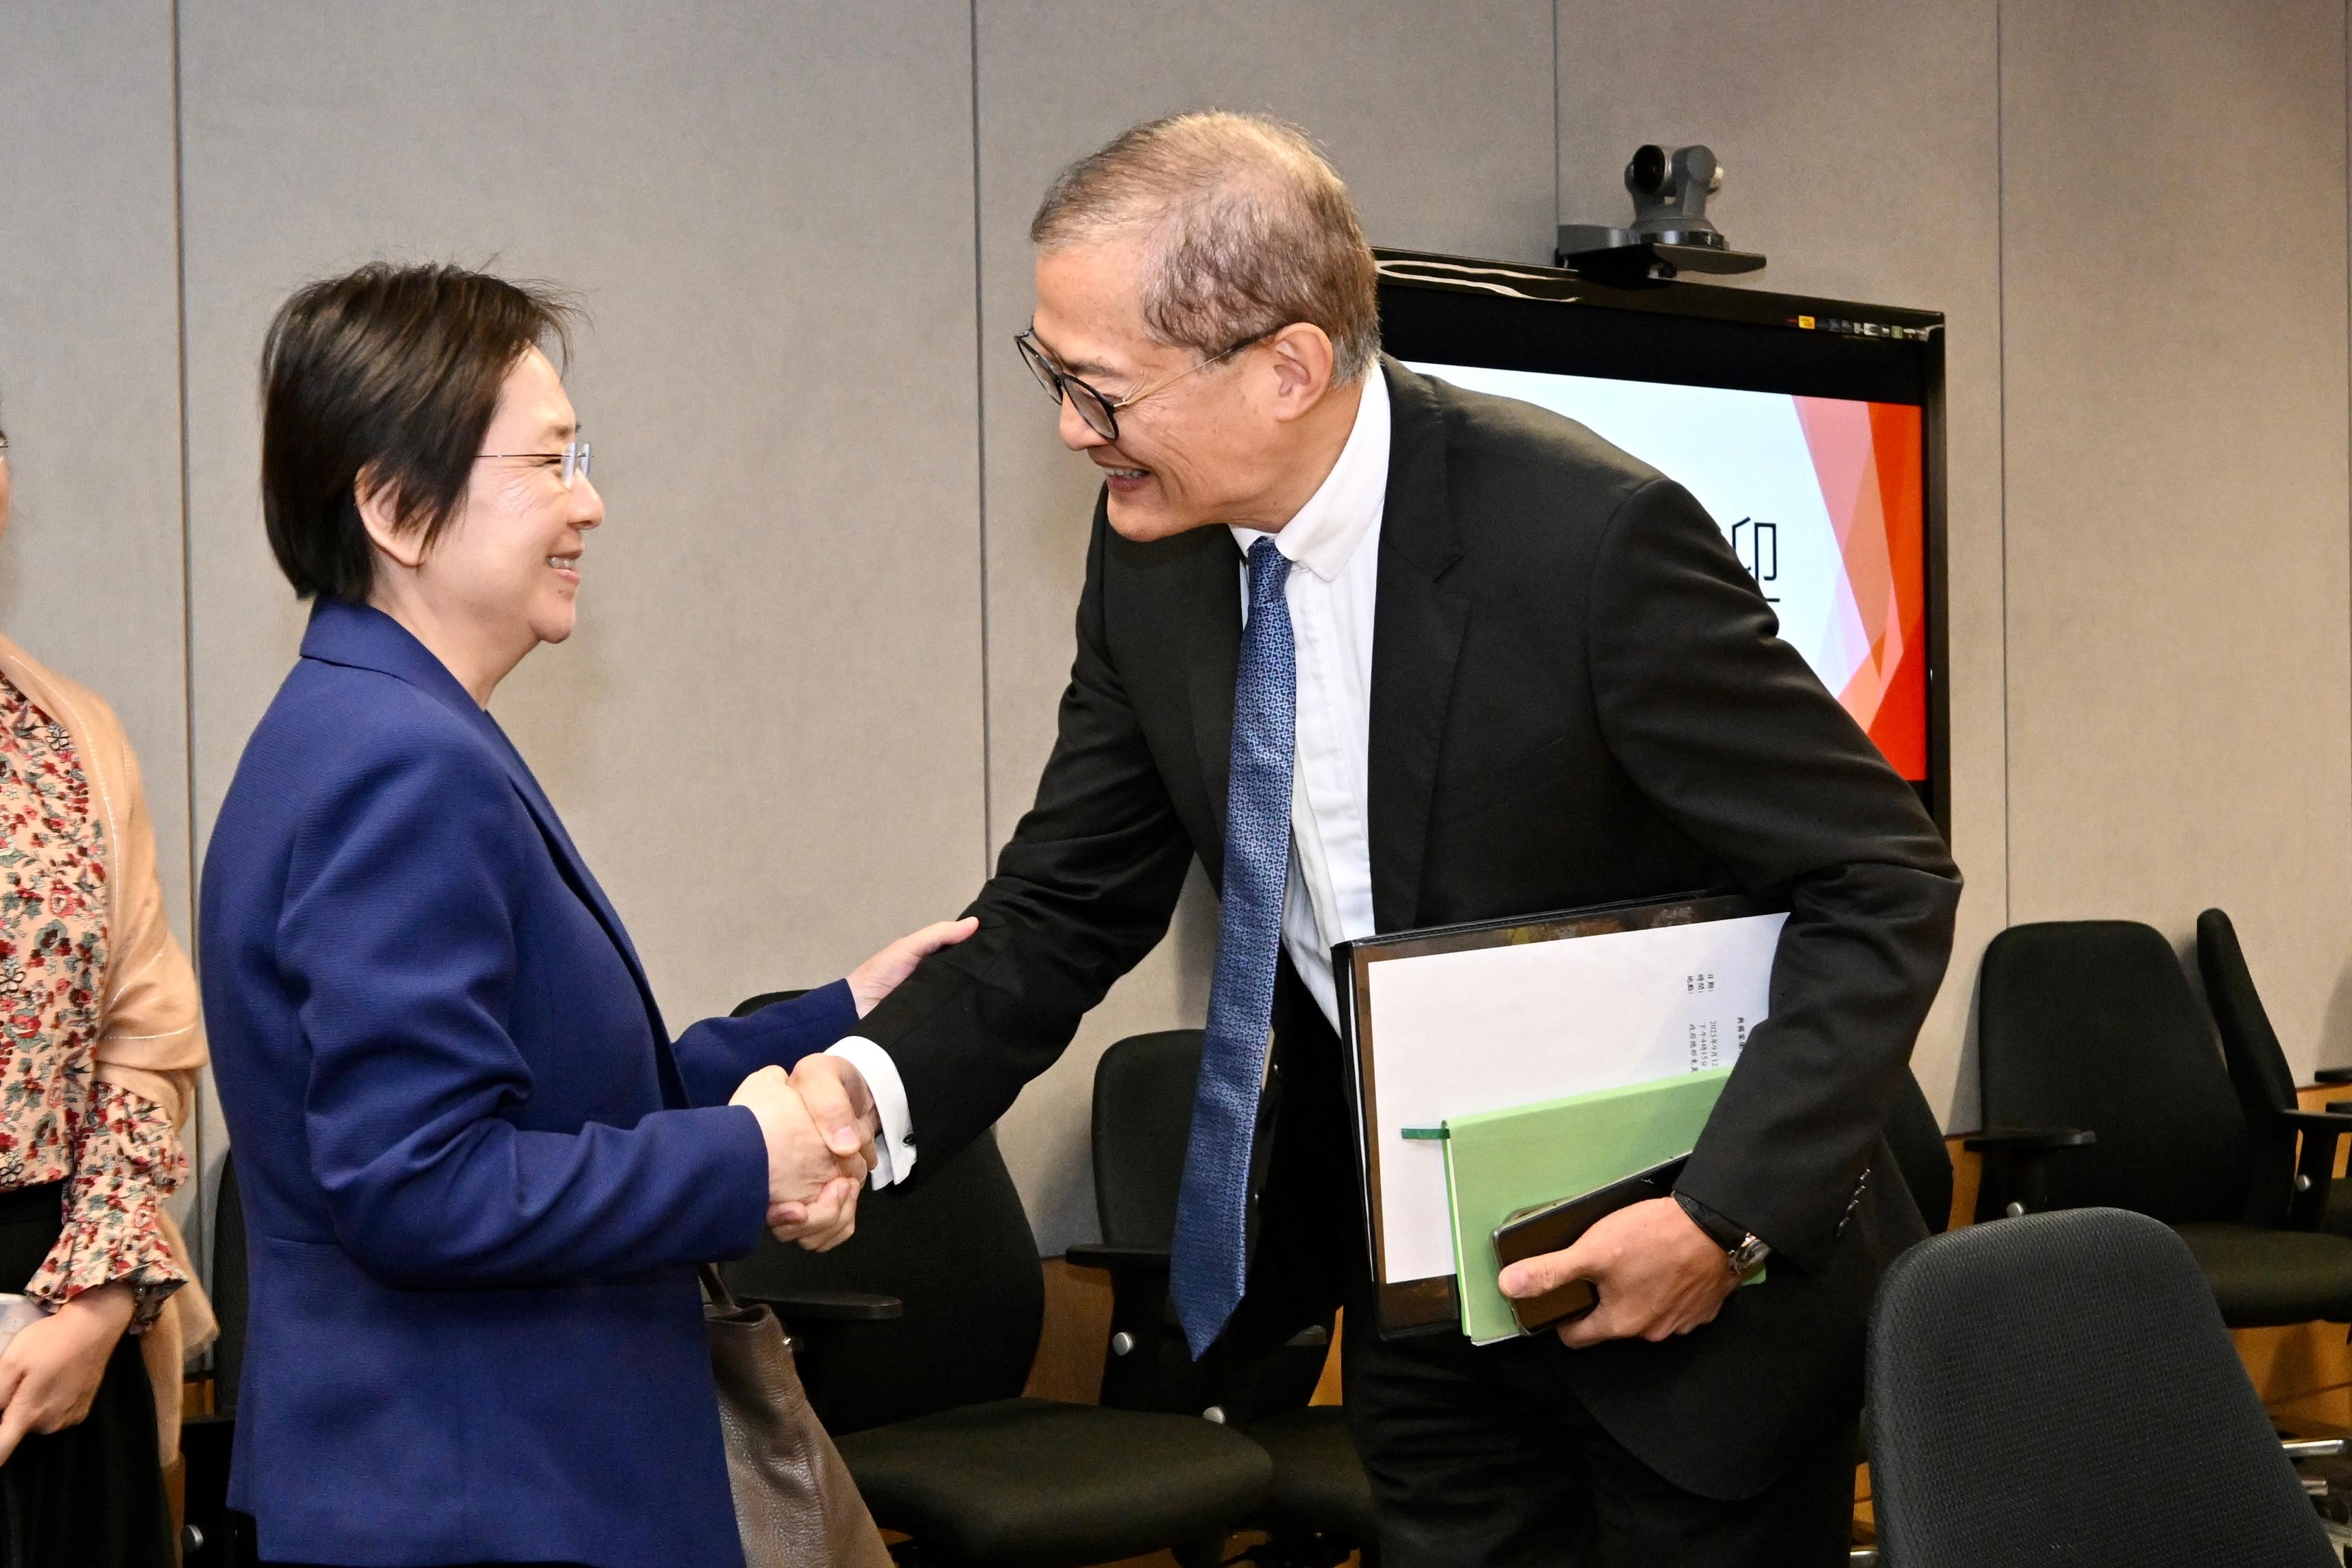 The Secretary for Health, Professor Lo Chung-mau (right), welcomes the Director General of the Office of Hong Kong, Macao and Taiwan Affairs of the National Health Commission, Ms Zhang Yang (left), and her delegation at the Central Government Offices today (September 12), followed by a meeting to exchange views on deepening medical co-operation between the Mainland and the Hong Kong Special Administrative Region.